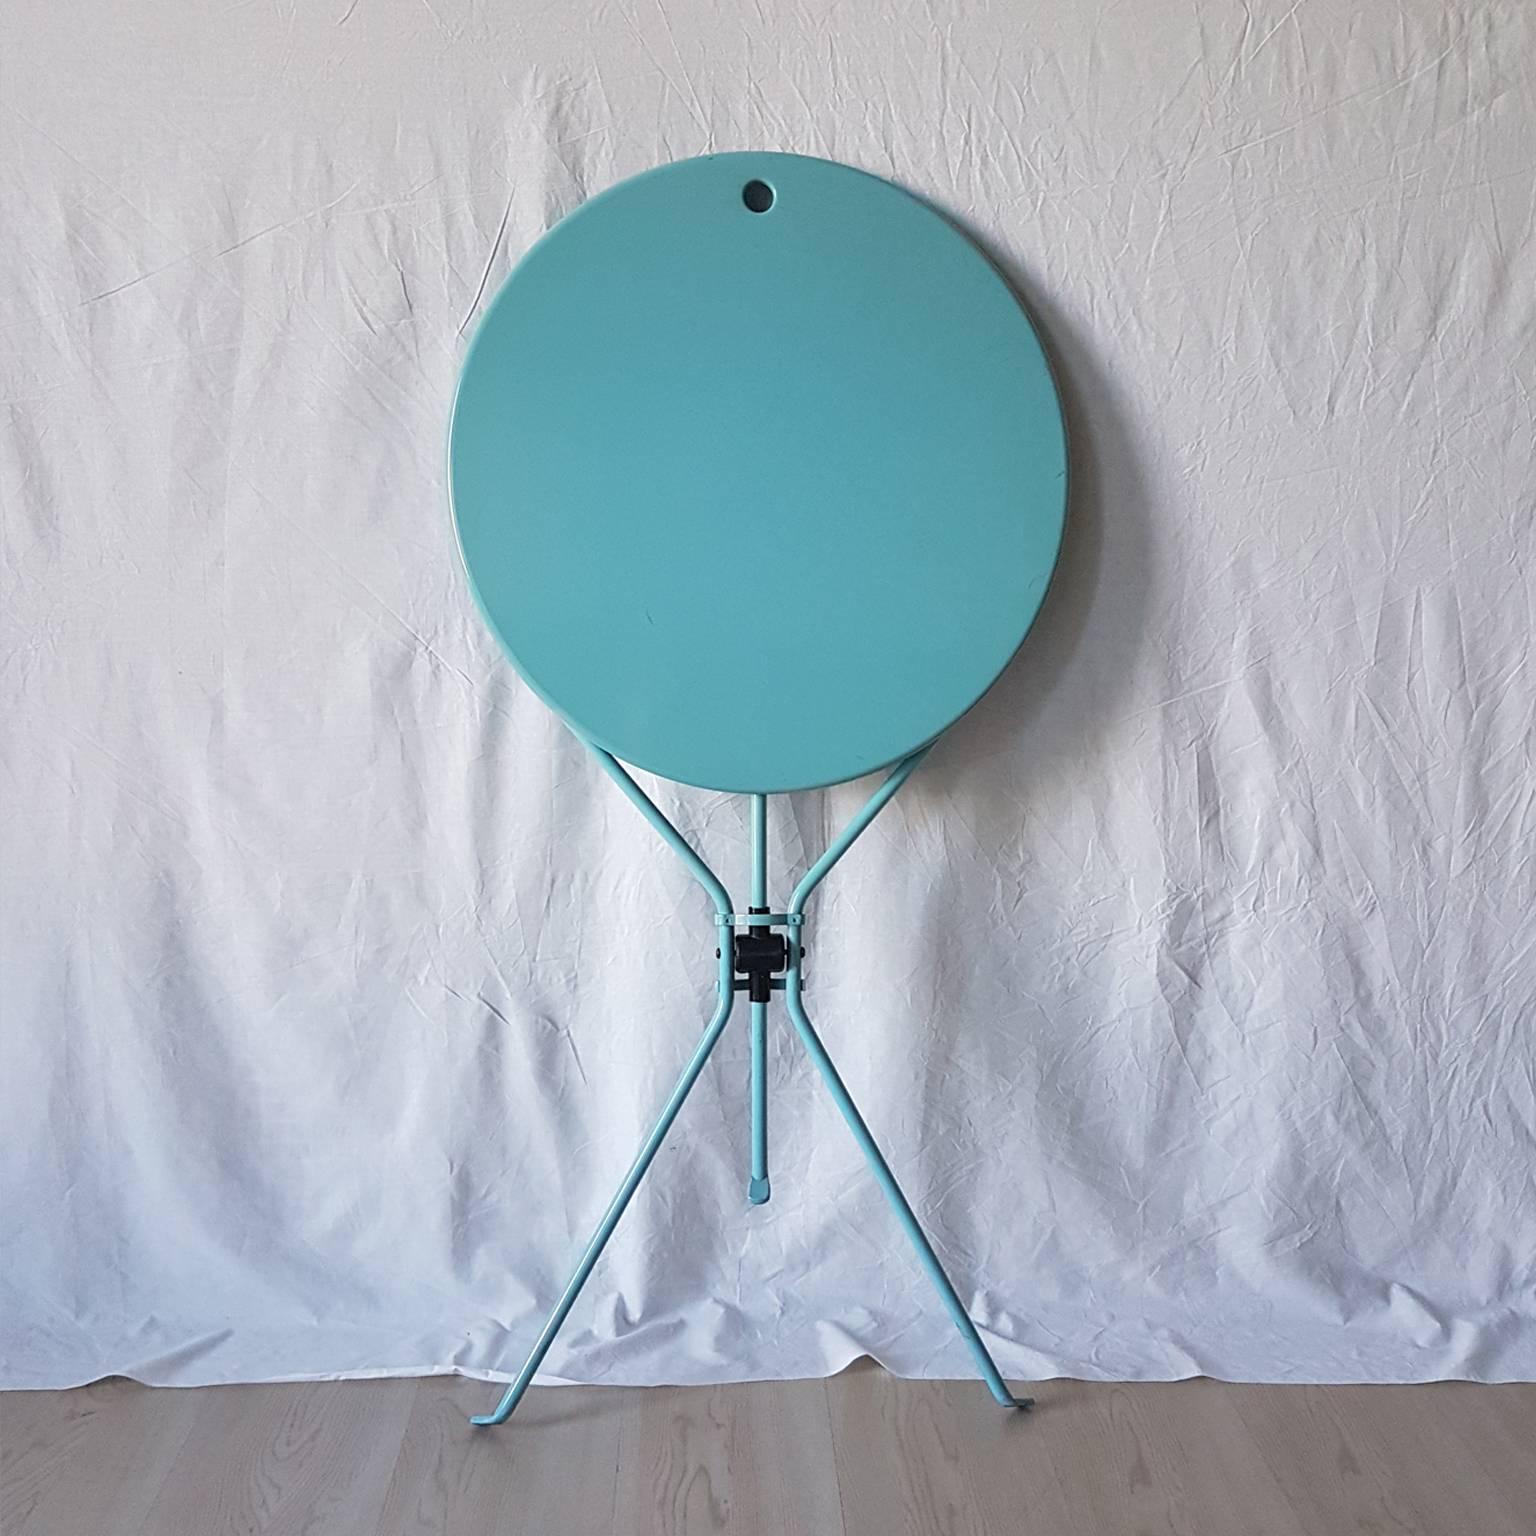 Cumano is a folding table designed by Achille Castiglioni for Zanotta in the 1978.
It is light blue enameled and it has a steel rod frame and top.
The dimensions are referred when table is open.